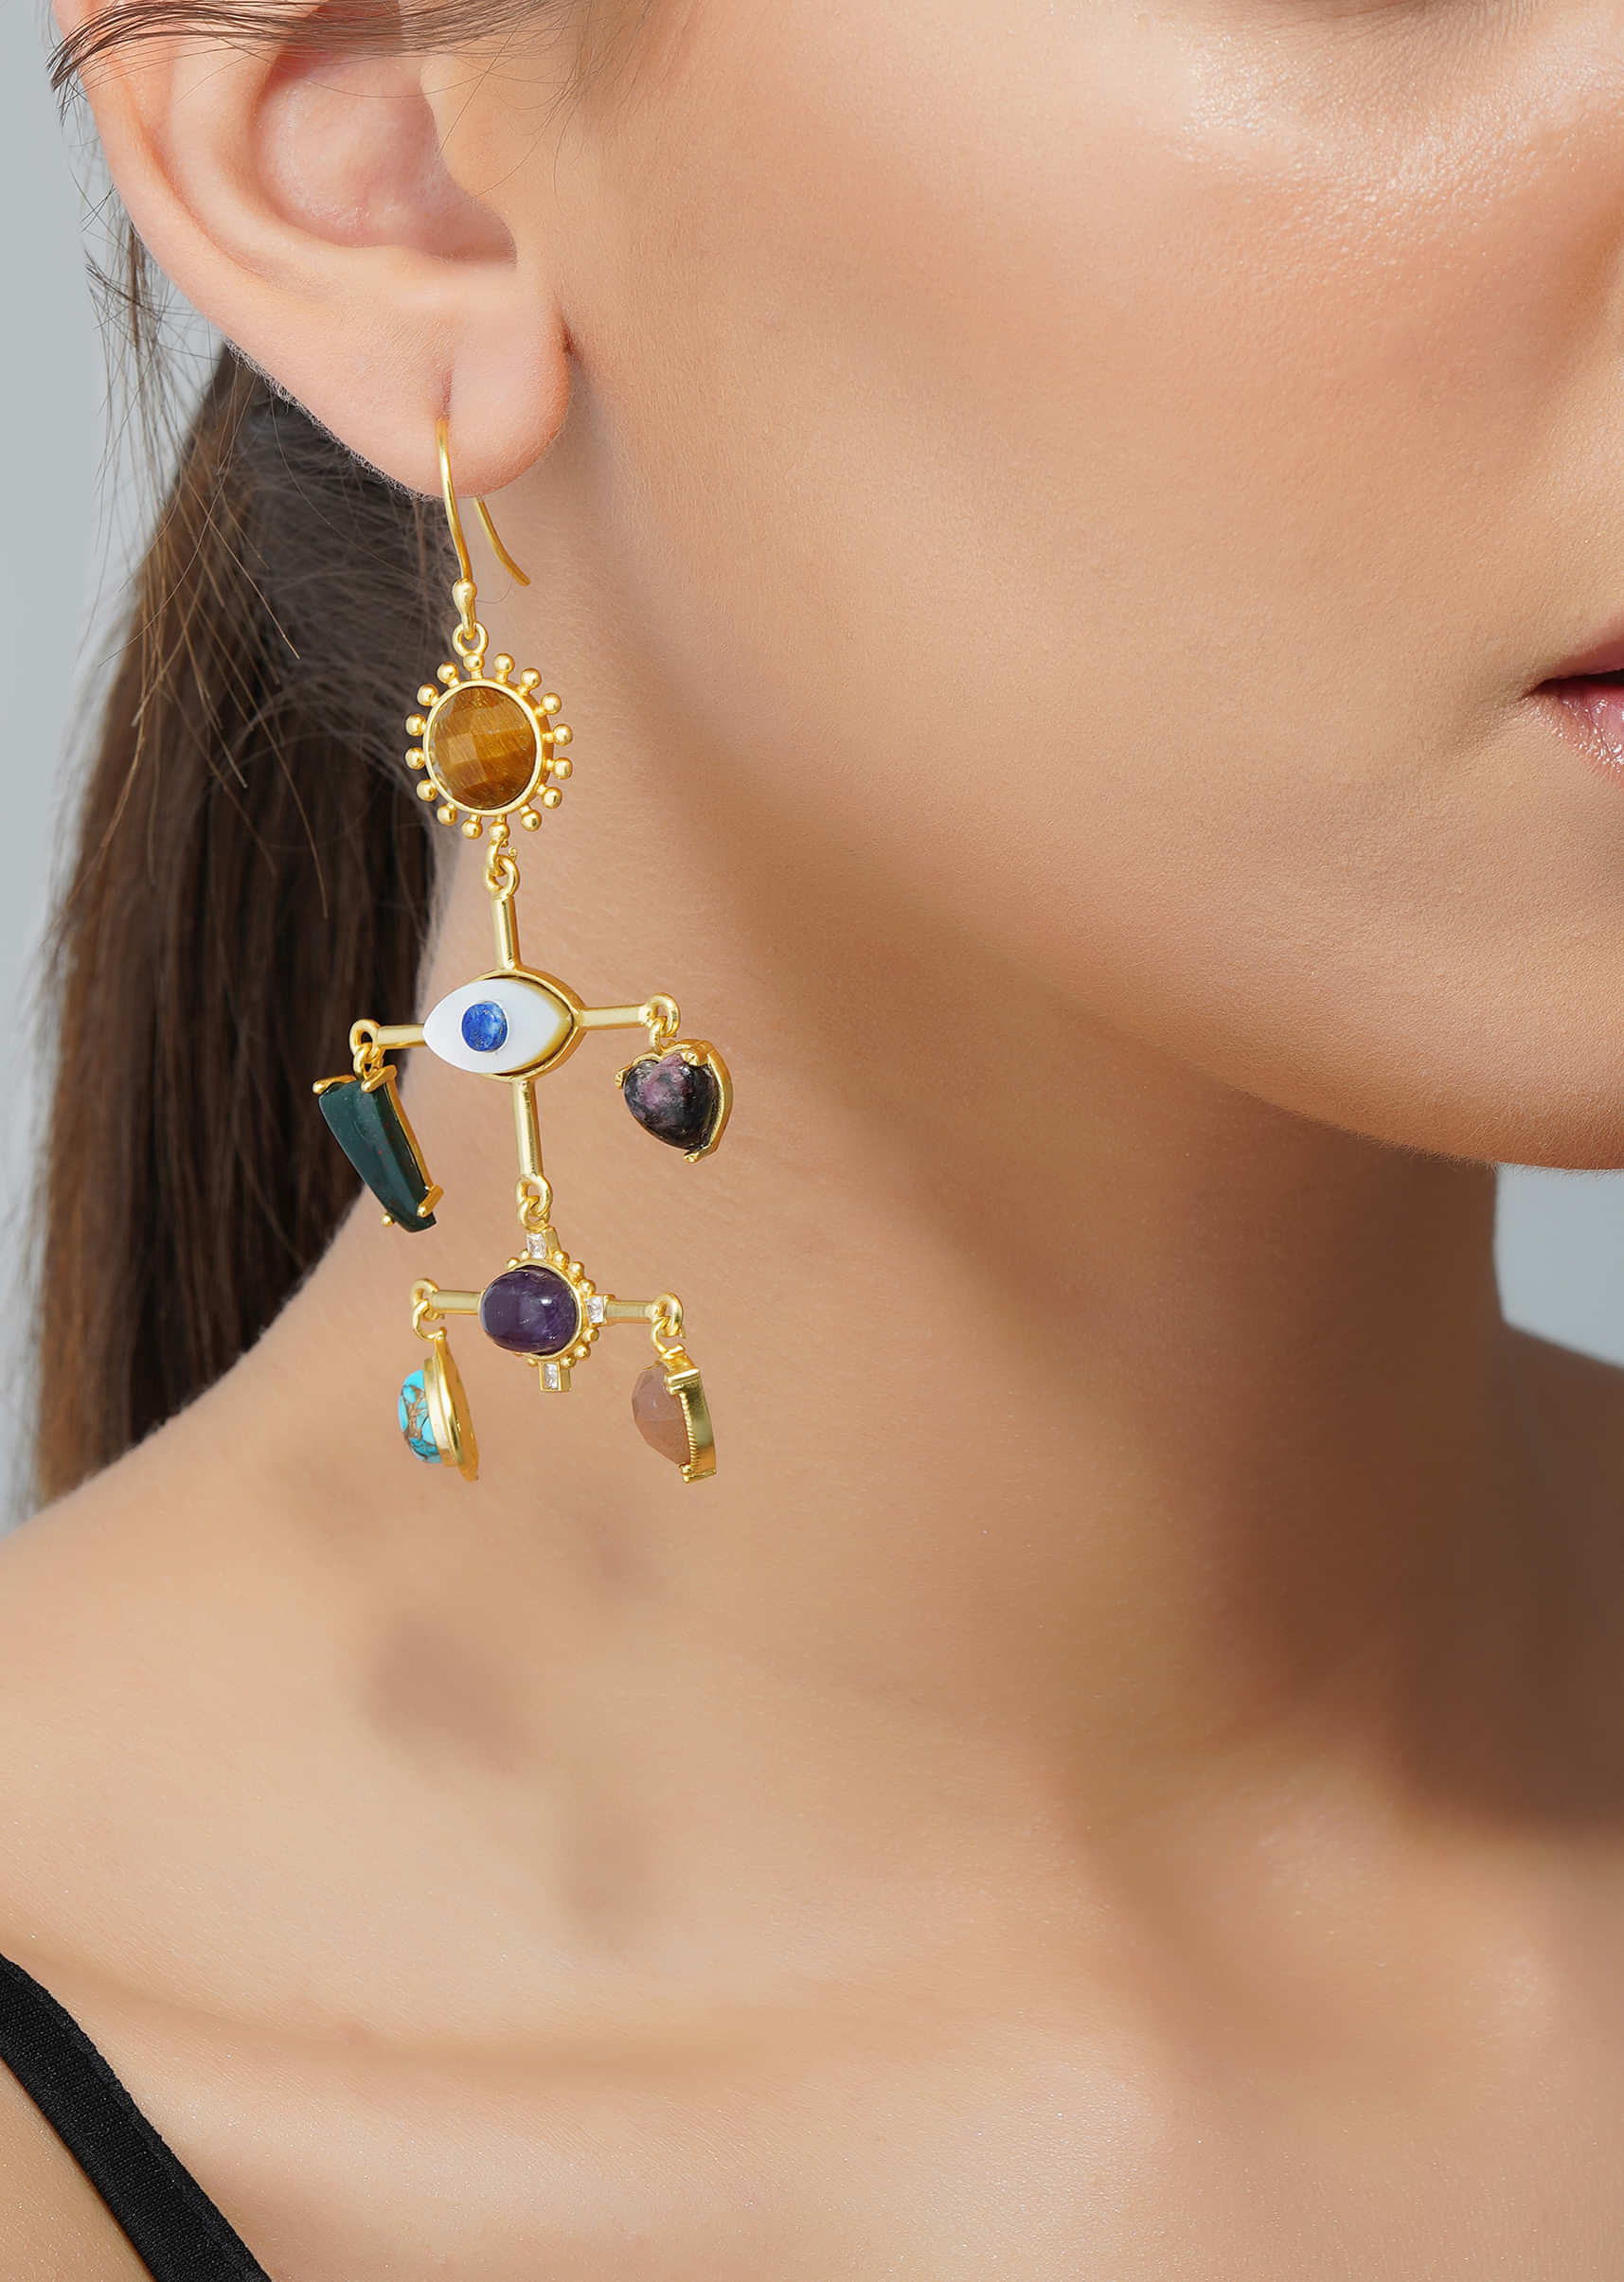 22Kt Gold Plated Multi Colored Statement Earrings With 7 Healing Stones